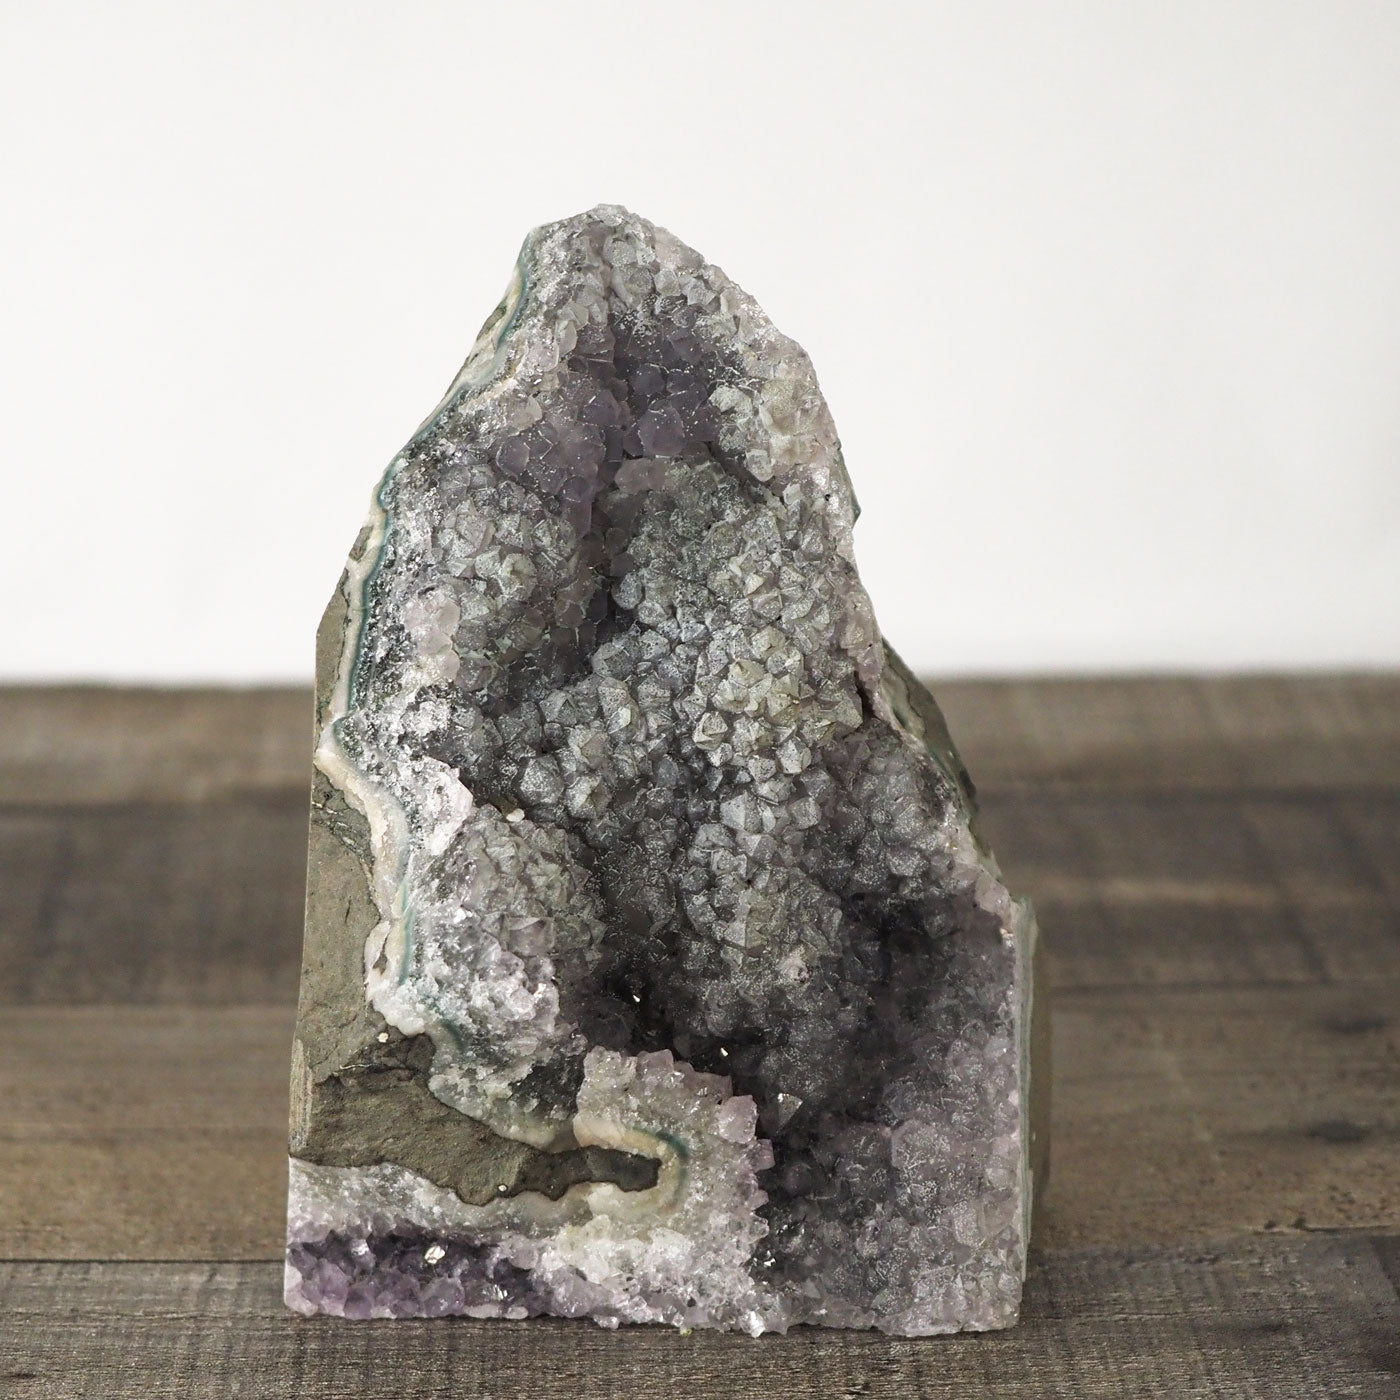 5" tall, unique, free-standing Grey Nebula Amethyst cluster